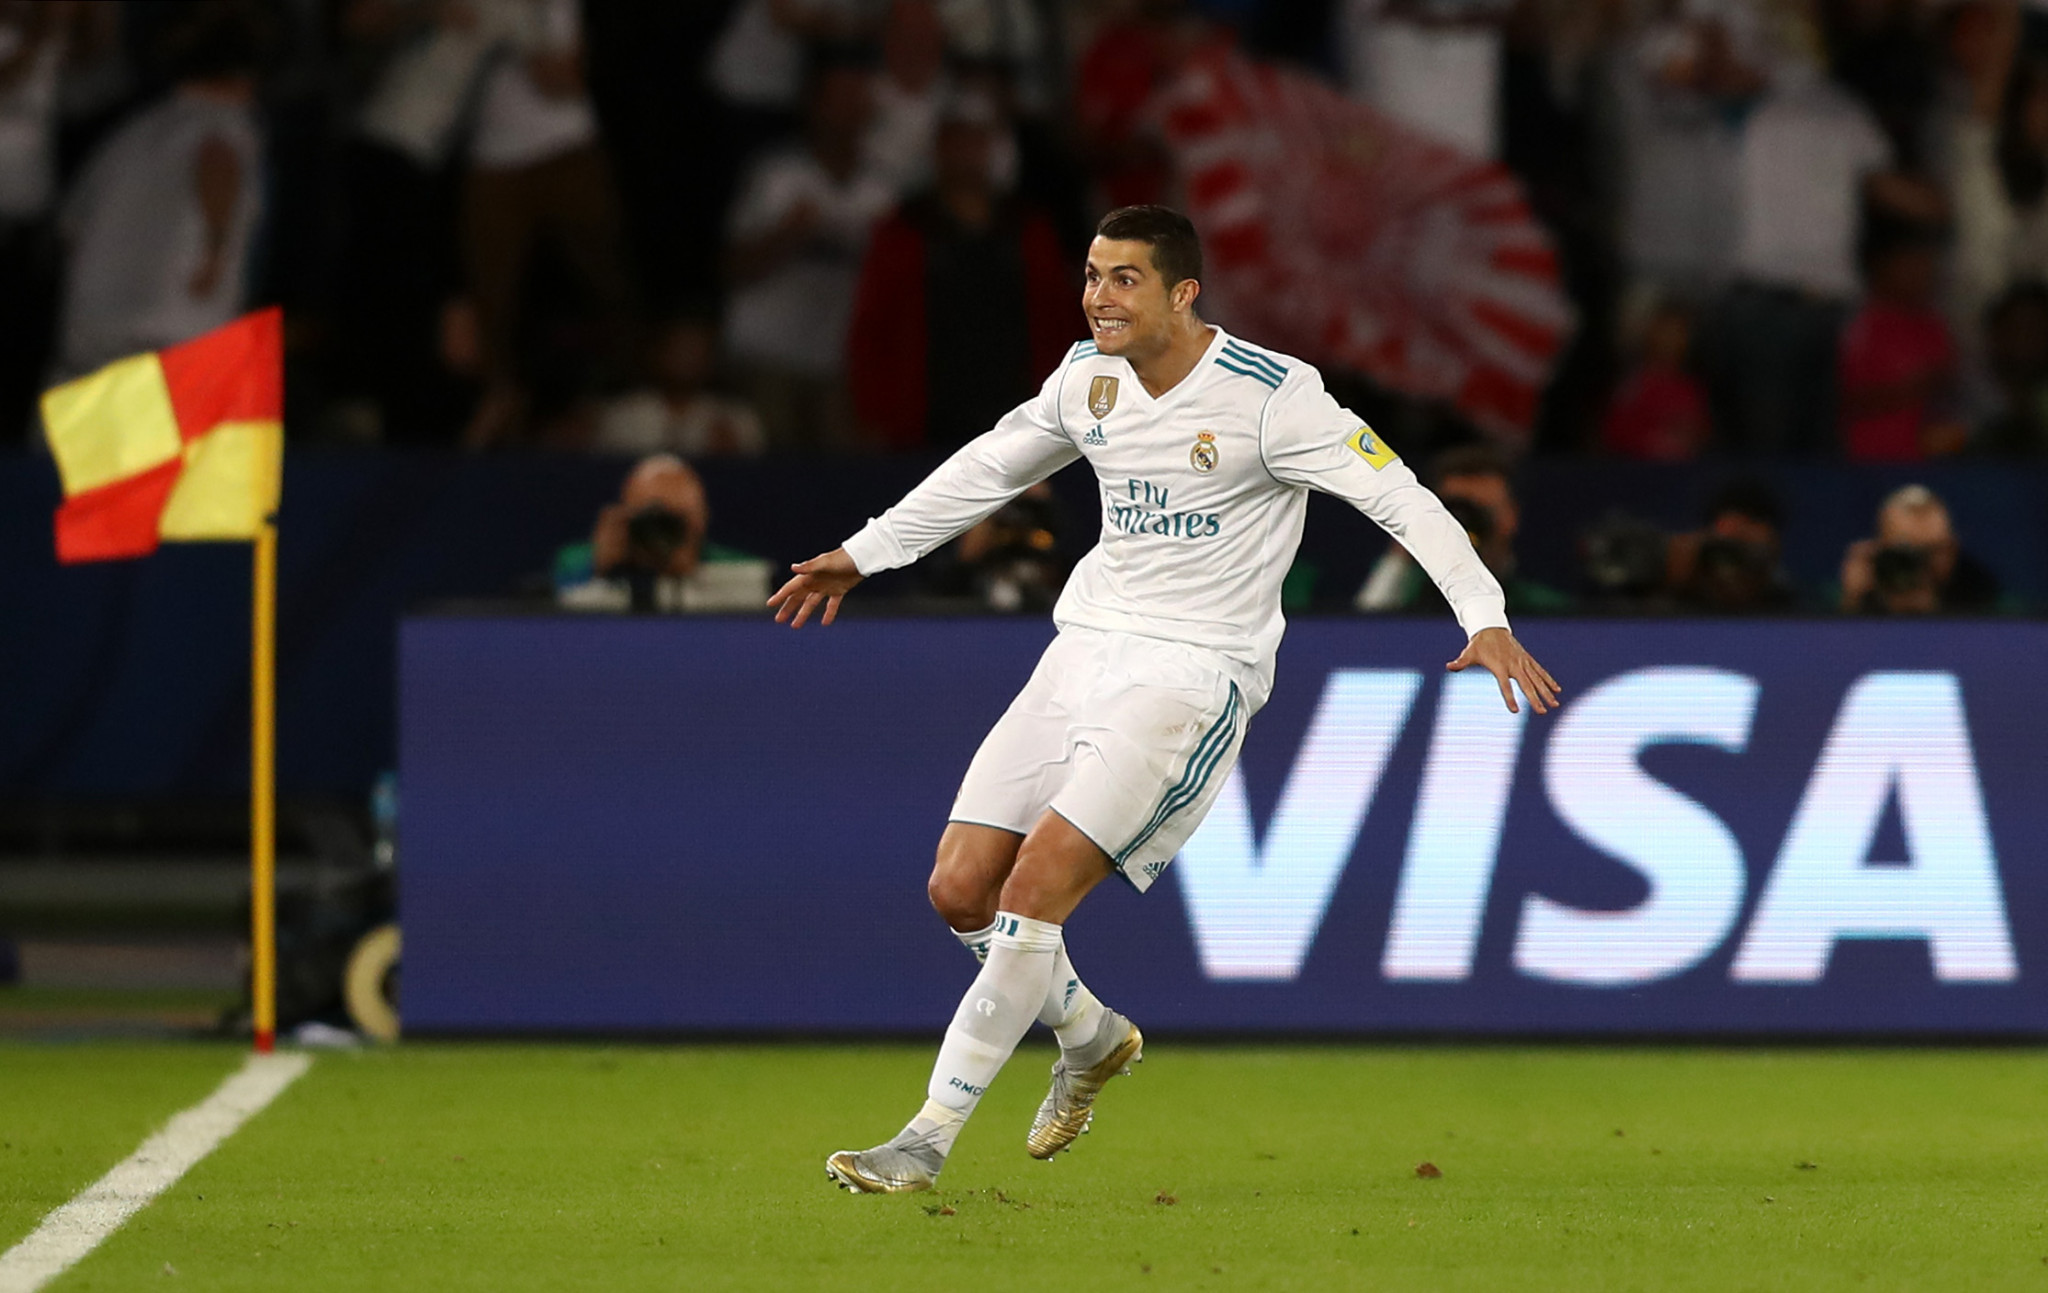 Cristiano Ronaldo celebrates after scoring the winning goal for Real Madrid in the FIFA Club World Cup final ©Getty Images